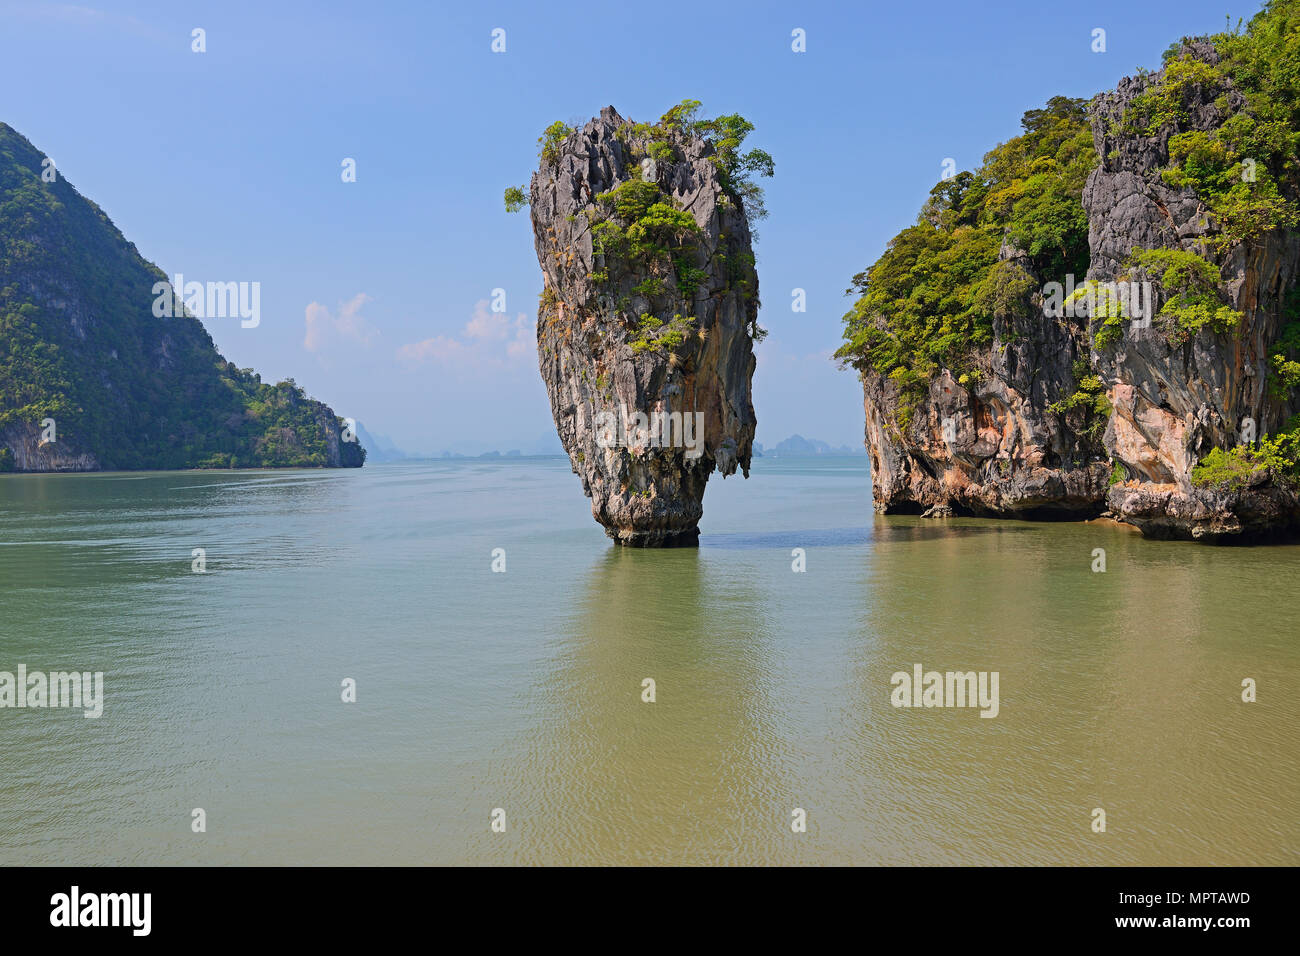 Striking rock formation on Khao Phing Kan Island, also James Bond Island, Thailand Stock Photo